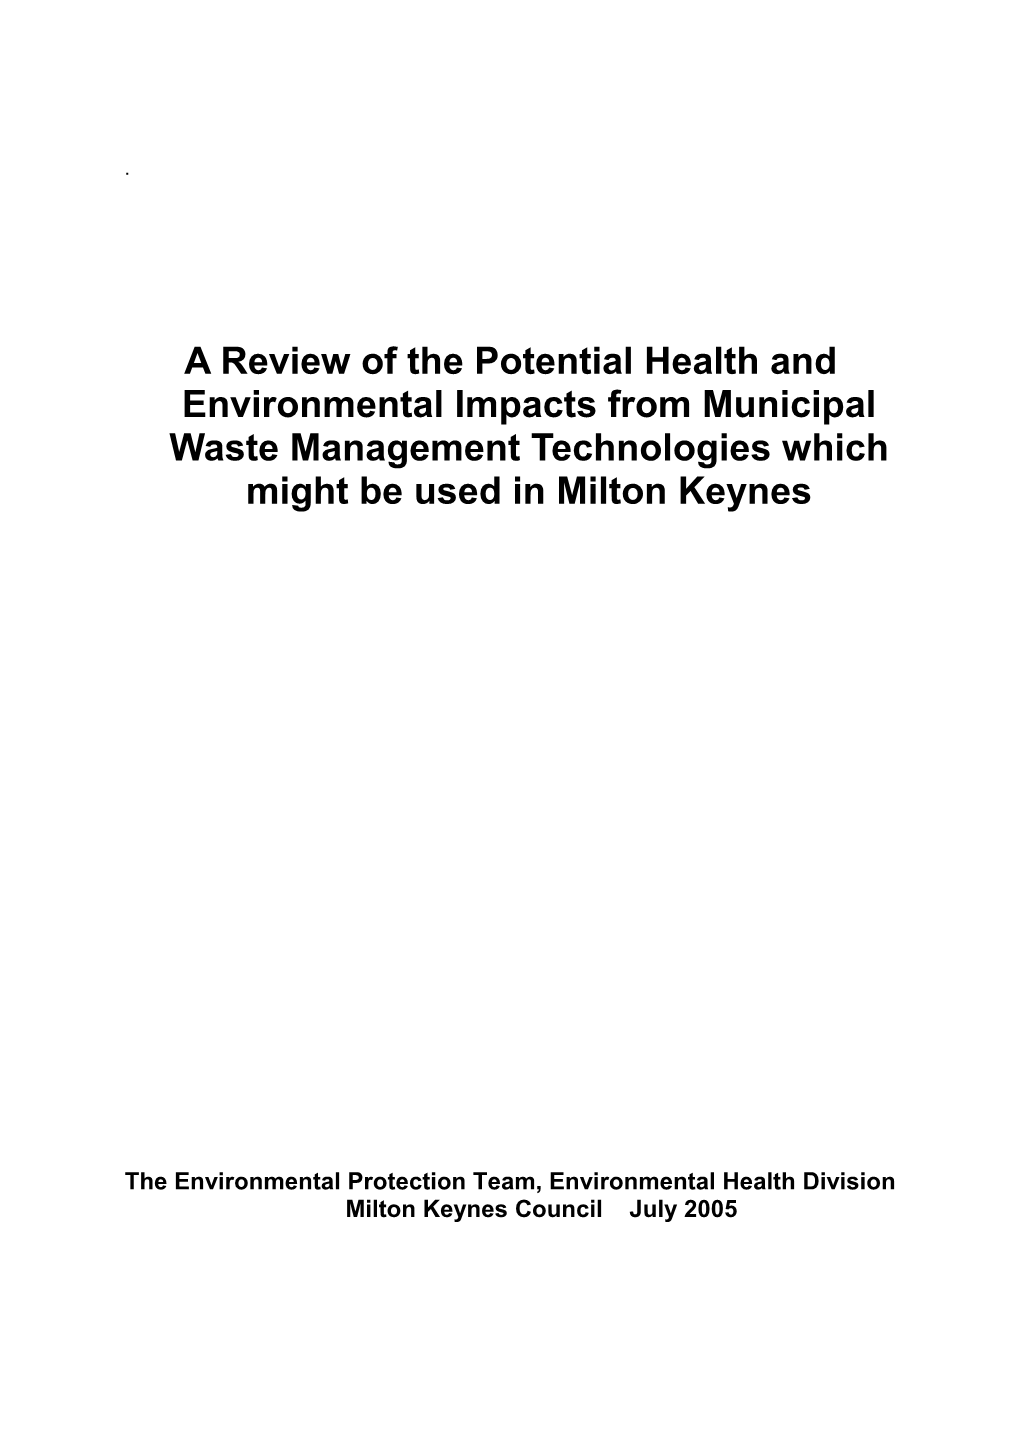 Potential Health and Environmental Impacts From